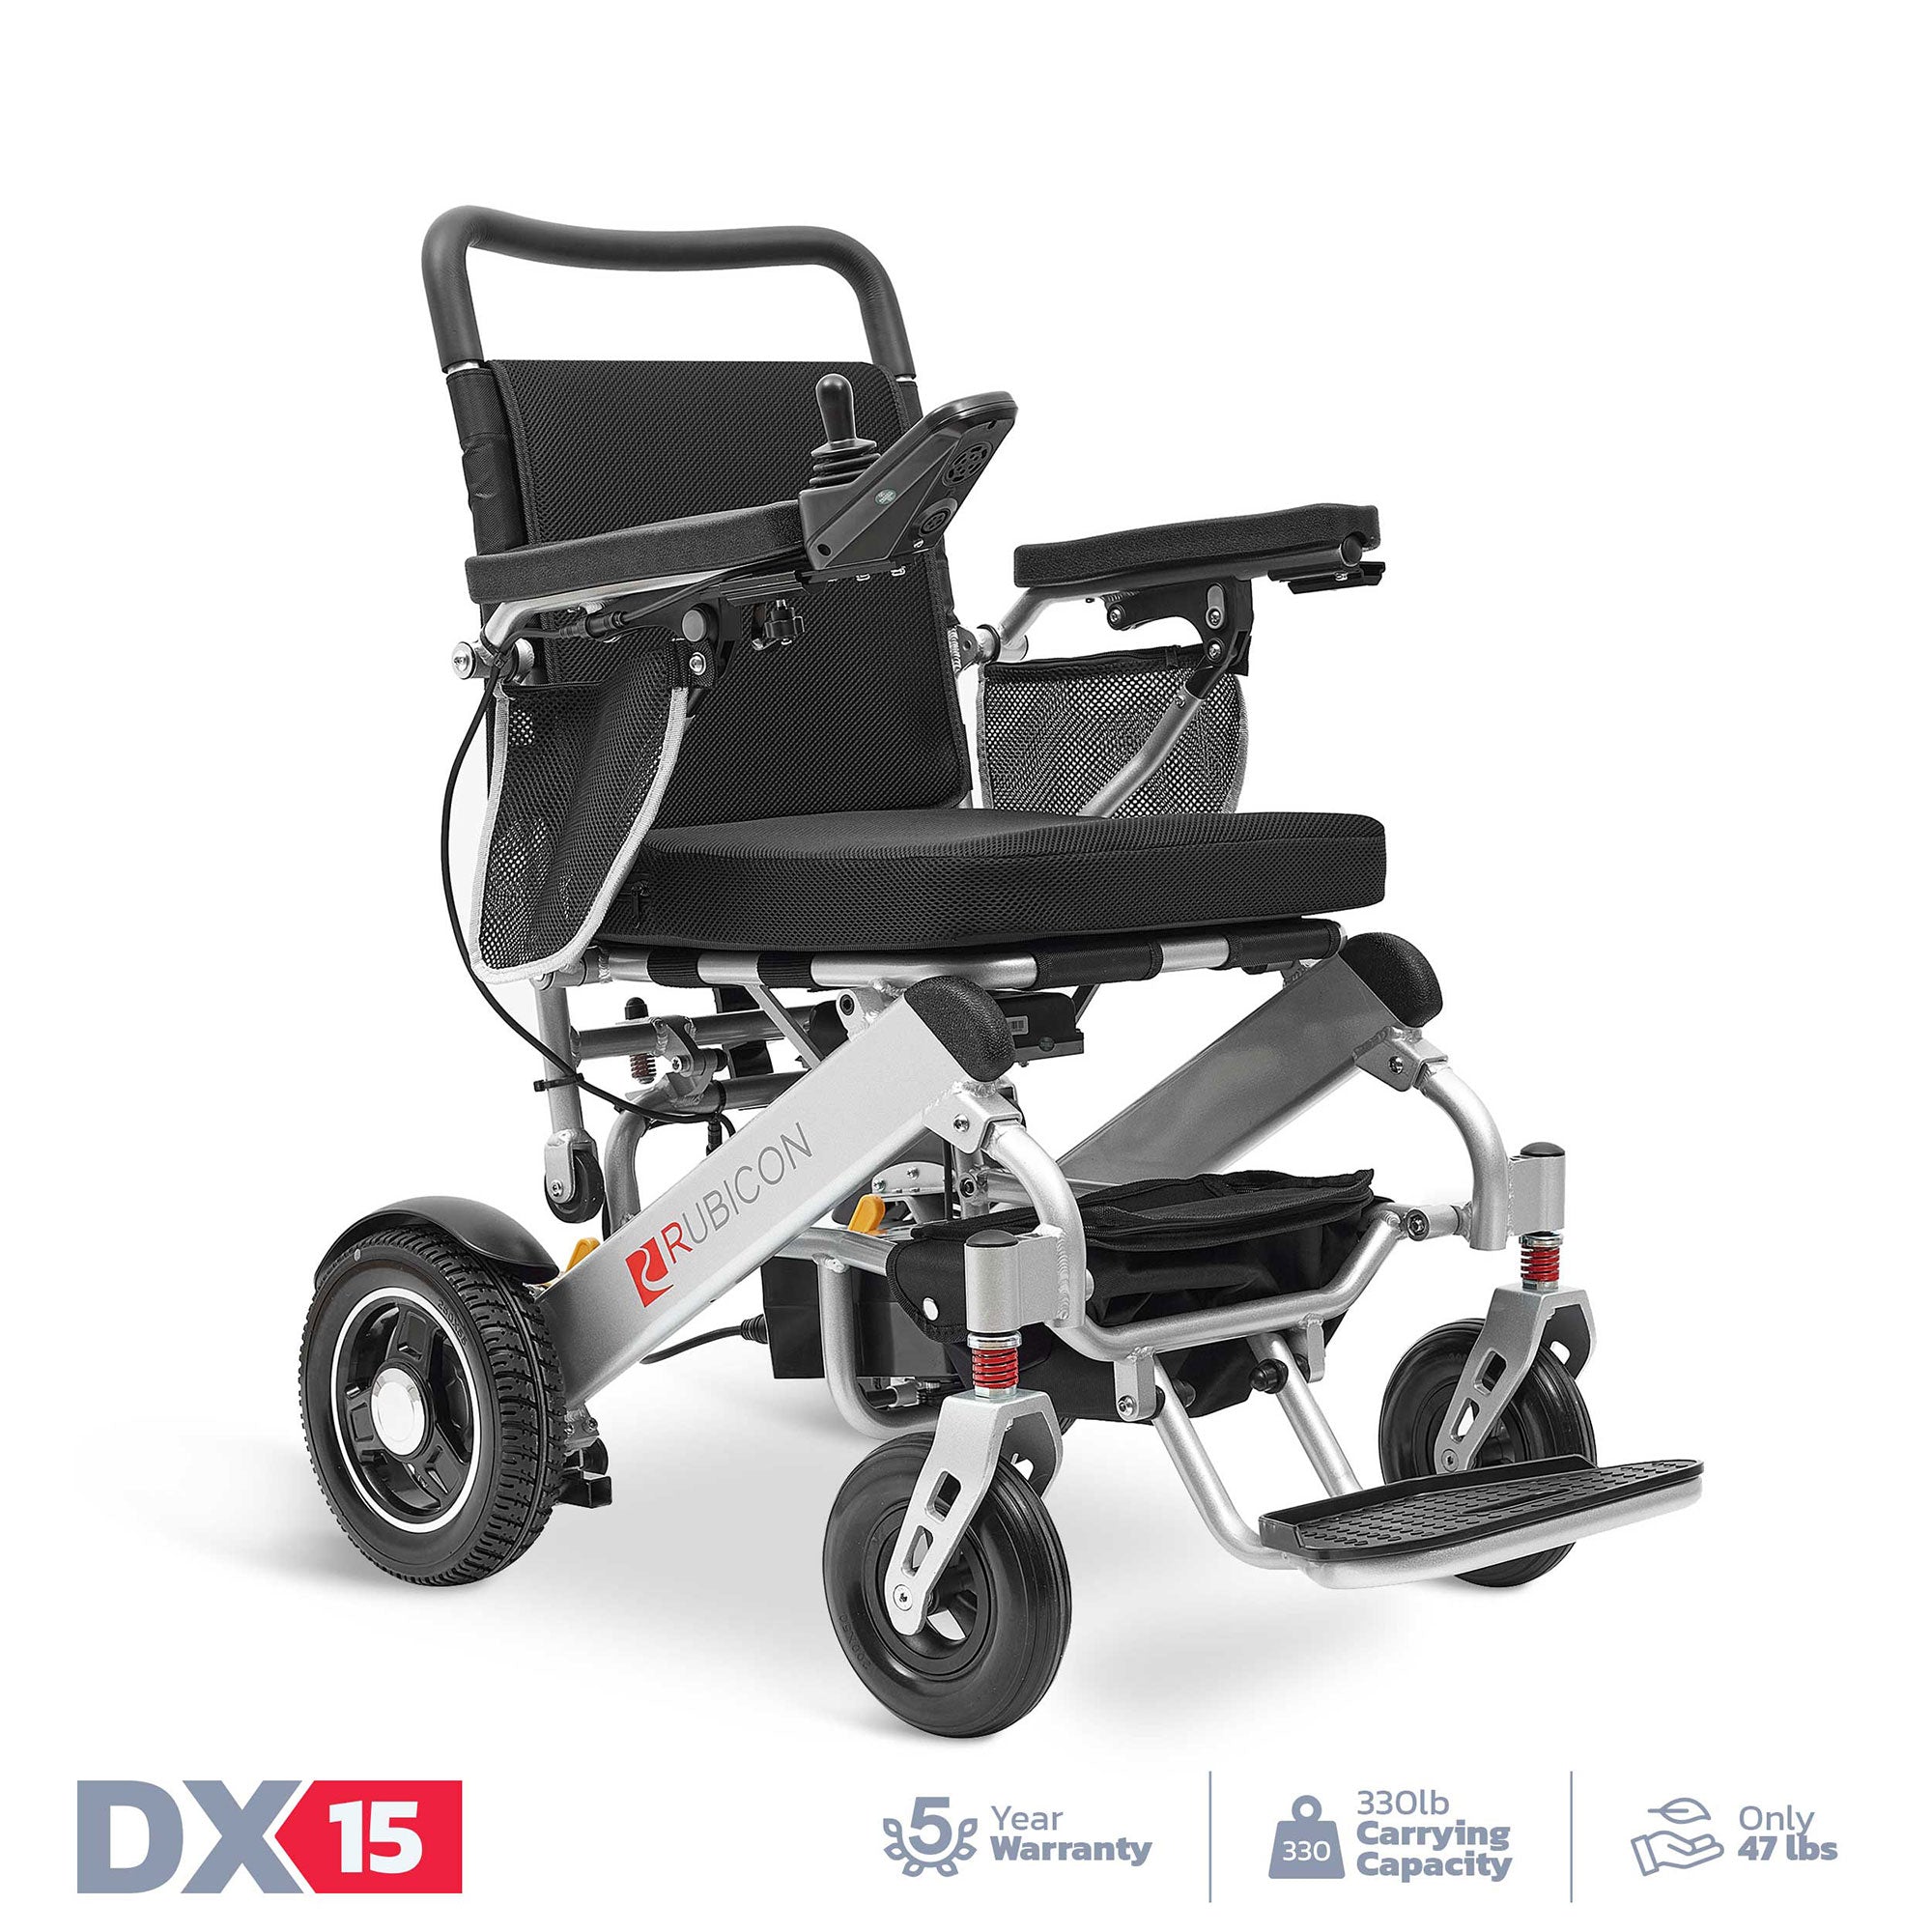 Rubicon DX15 - Lightweight and Brushless Motors Luxurious Electric Wheelchair - Electricwheelchair.Store